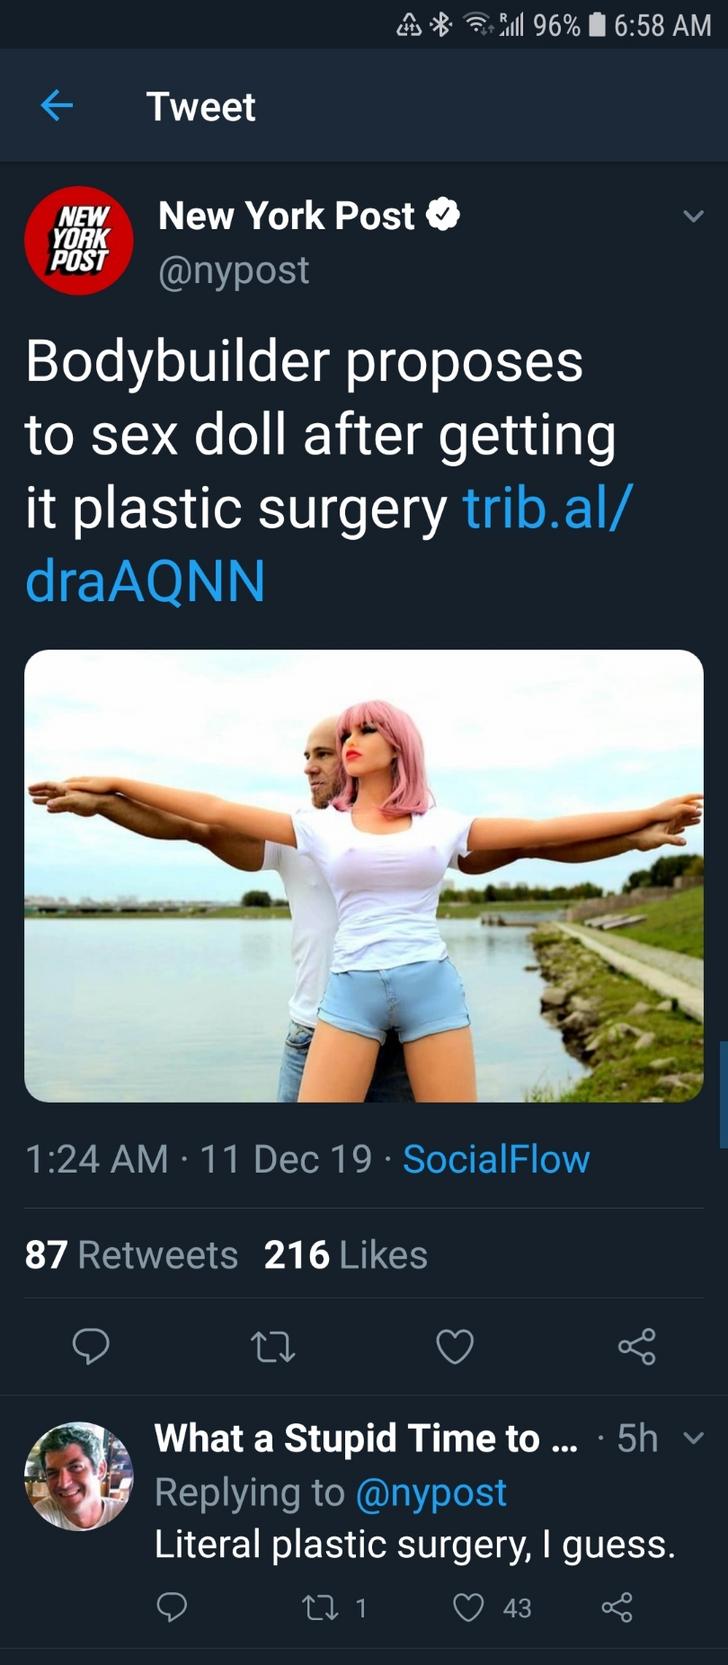 poster - 2 Bull 96% Lt Tweet New York Post New York Post Bodybuilder proposes to sex doll after getting it plastic surgery trib.al draAQNN 11 Dec 19. SocialFlow 87 216 e C2 What a Stupid Time to ... . 5hv Literal plastic surgery, I guess.